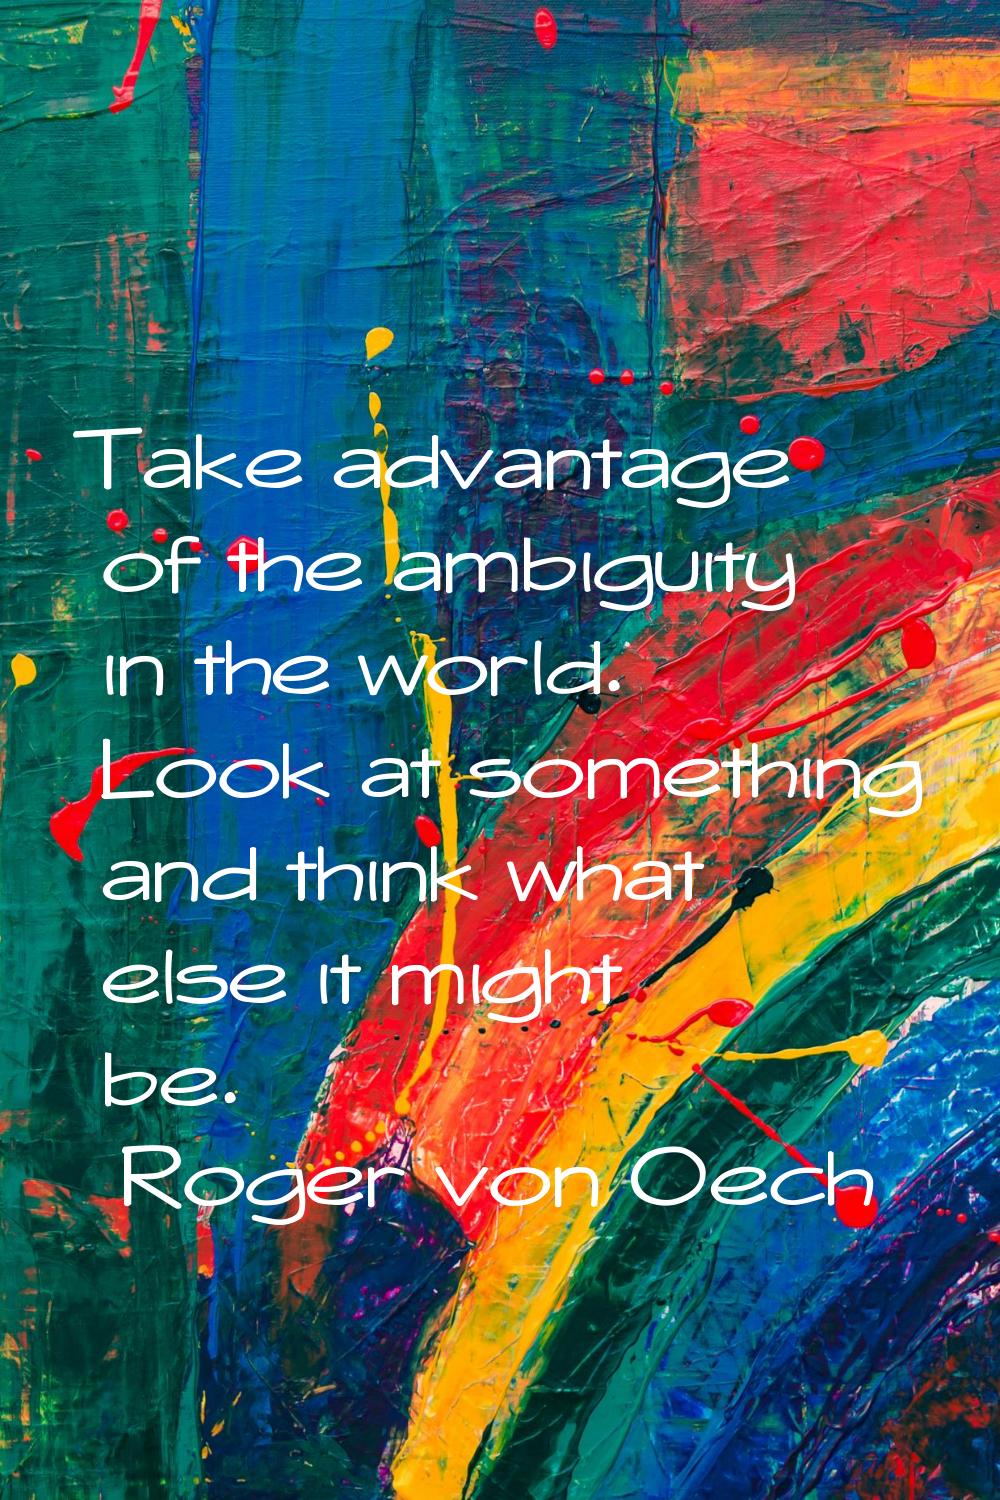 Take advantage of the ambiguity in the world. Look at something and think what else it might be.